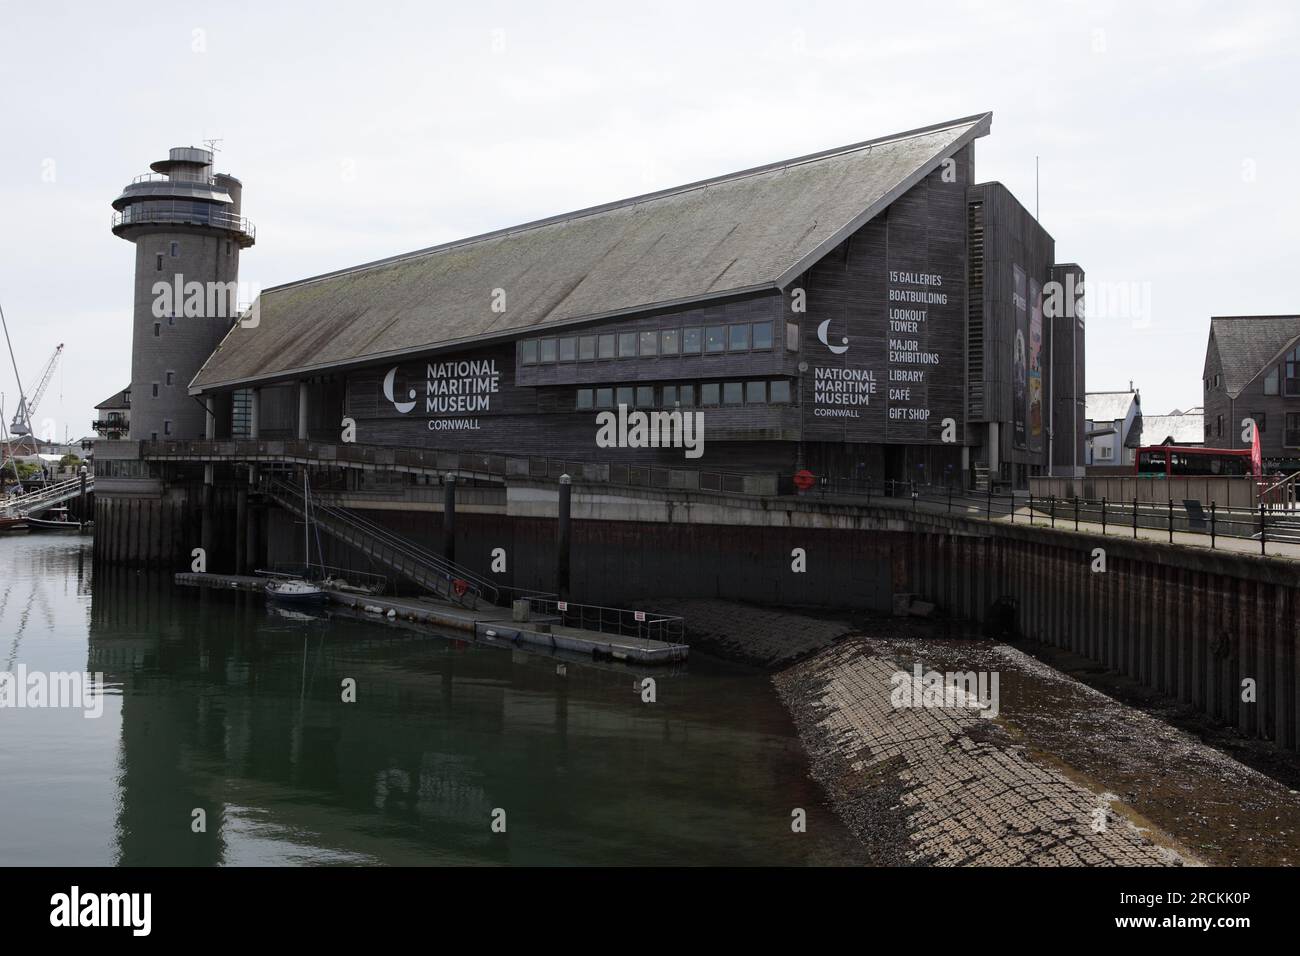 External aspect of the National Maritime Museum in Discovery Quay, Falmouth, Cornwall, England. Stock Photo